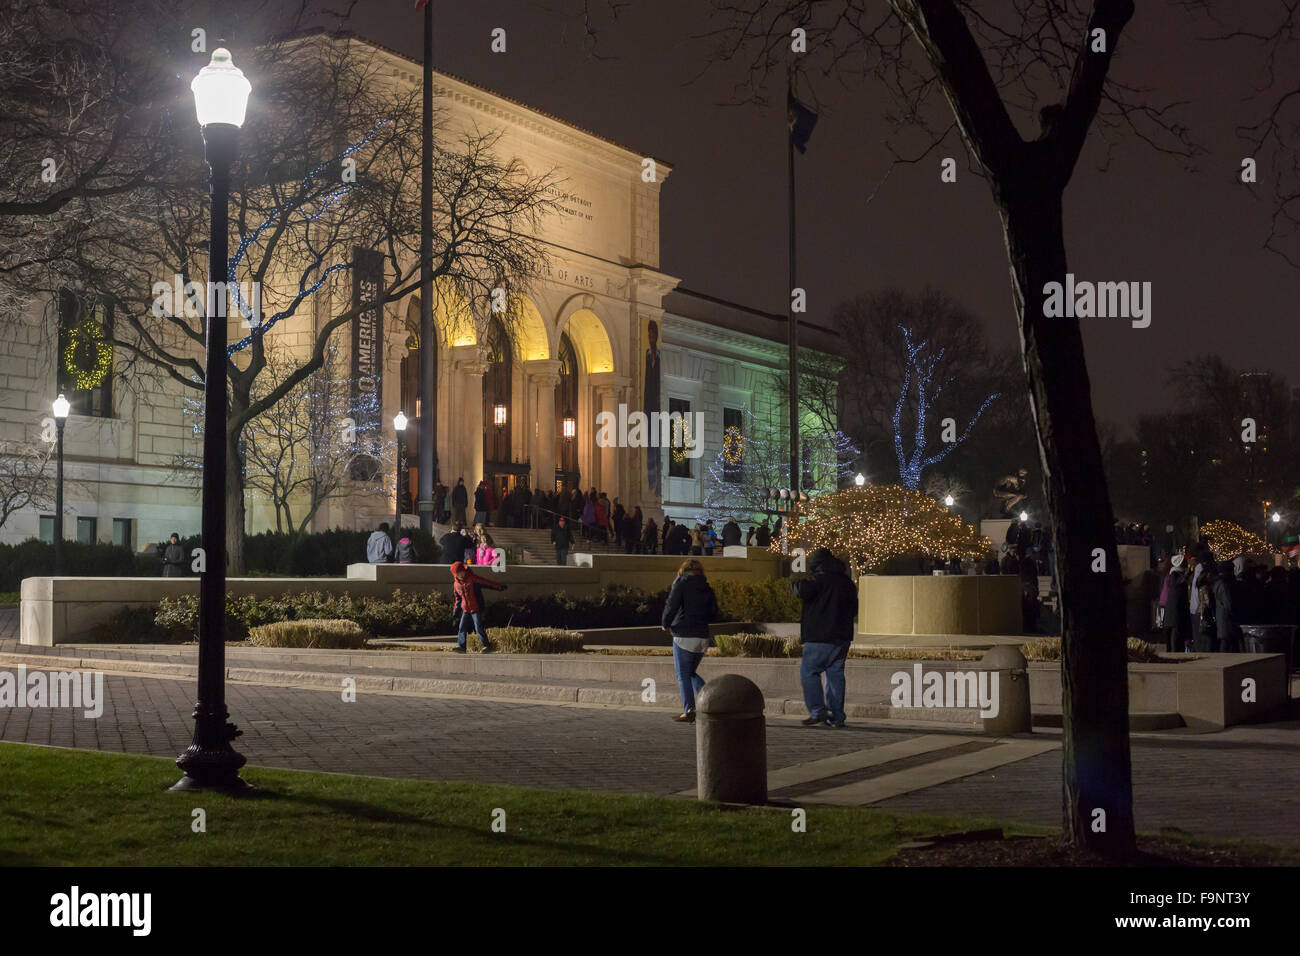 Detroit, Michigan - The Detroit Institute of Arts, decorated for the Christmas holidays. Stock Photo